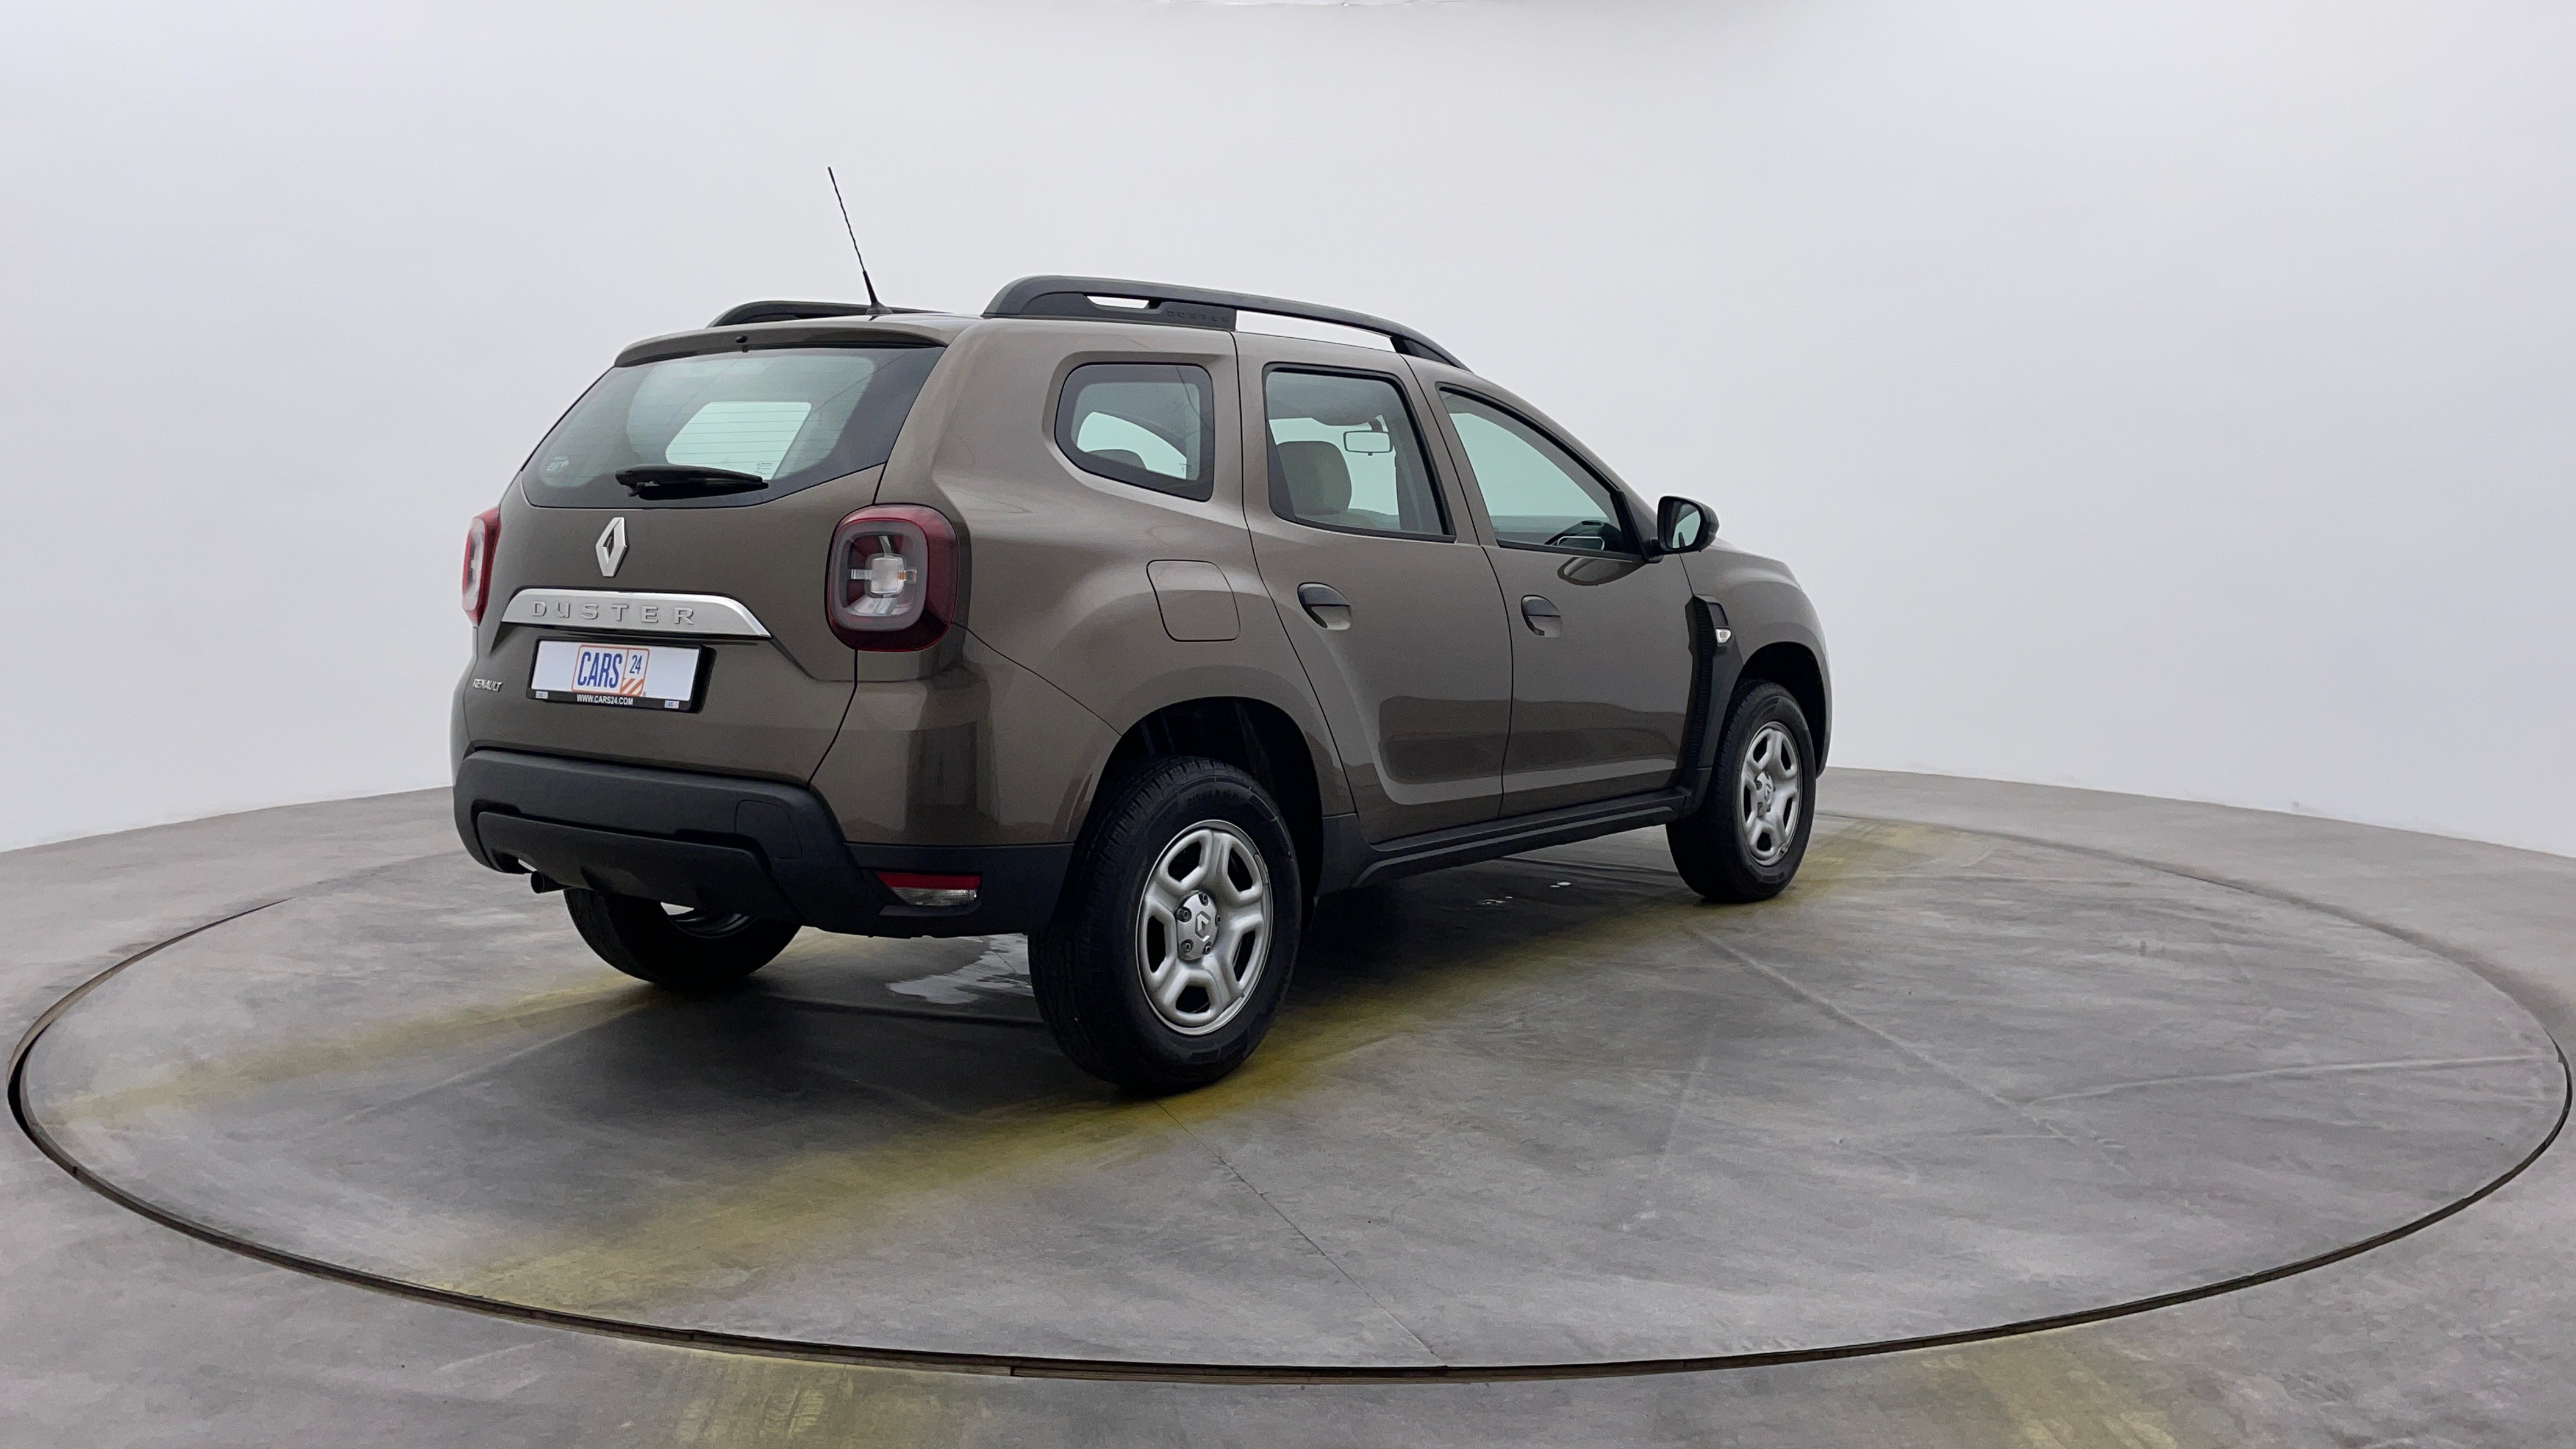 Renault Duster-Right Back Diagonal (45- Degree) View